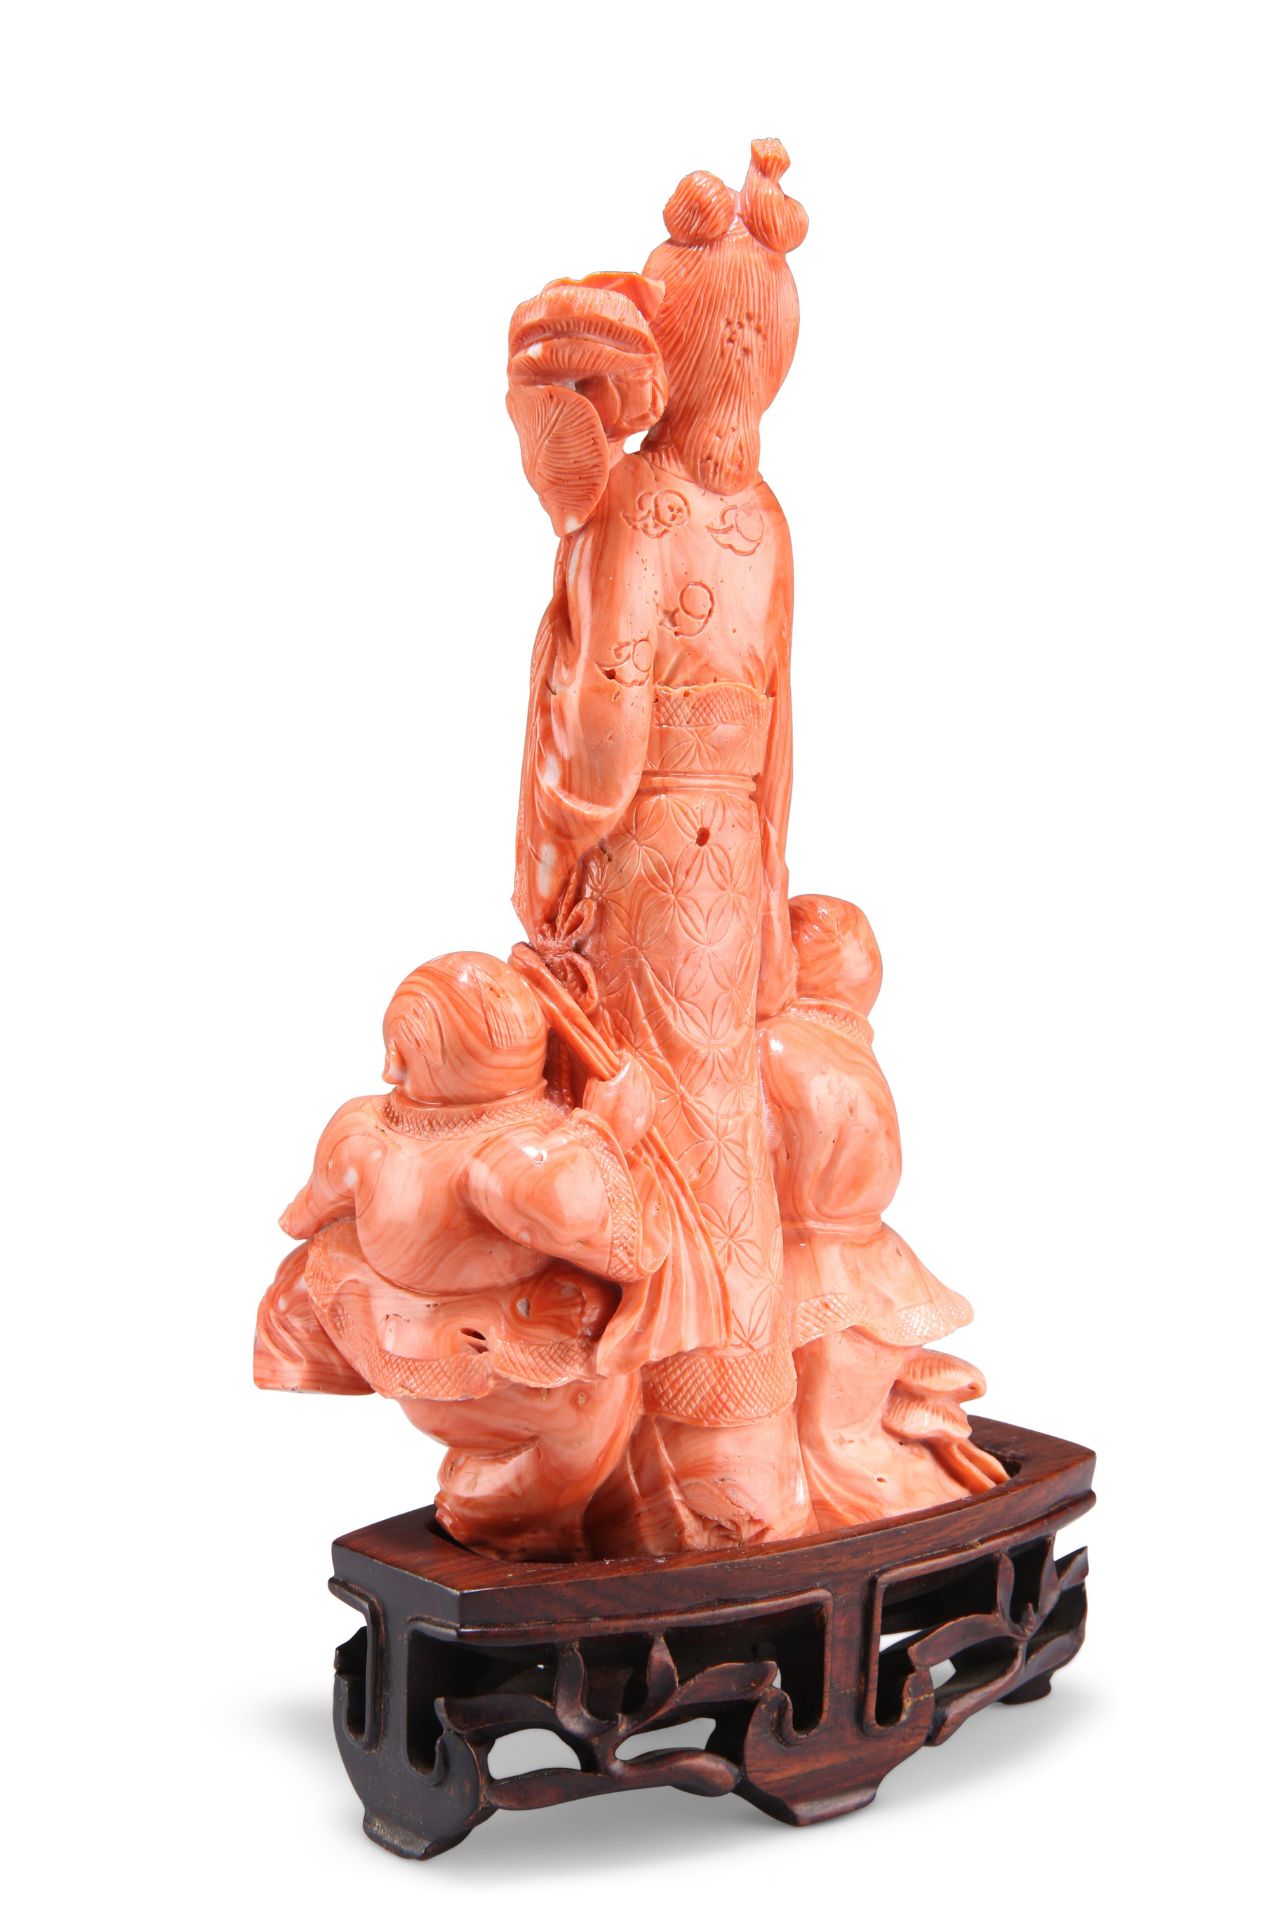 A FINE 19TH CENTURY CHINESE CARVED CORAL FIGURE GROUP - Image 2 of 2